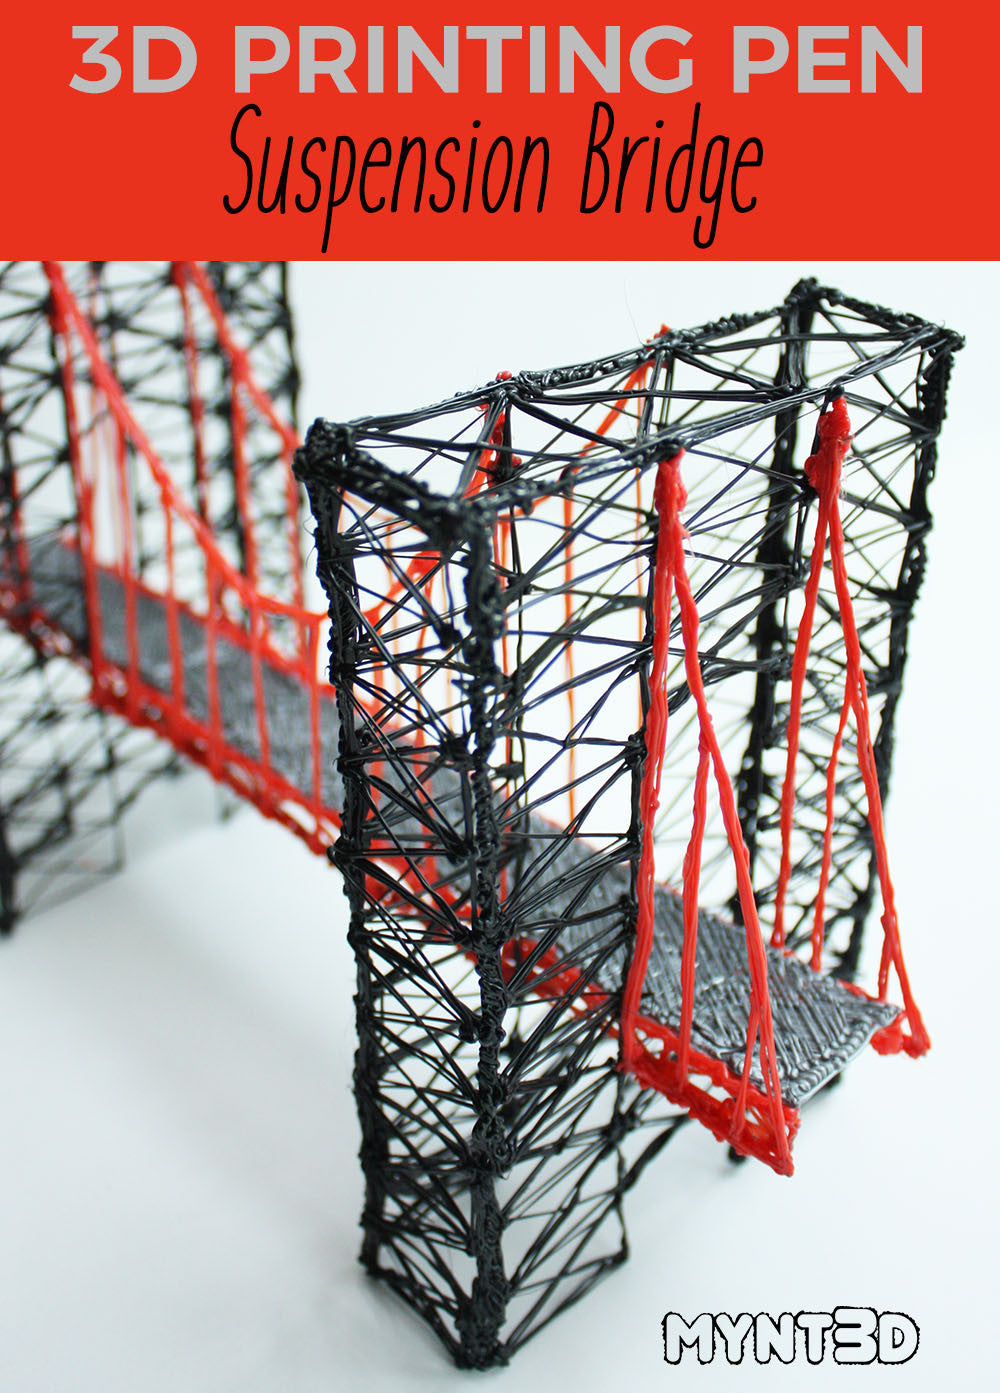 Suspension Bridge Made with a 3D Printing Pen